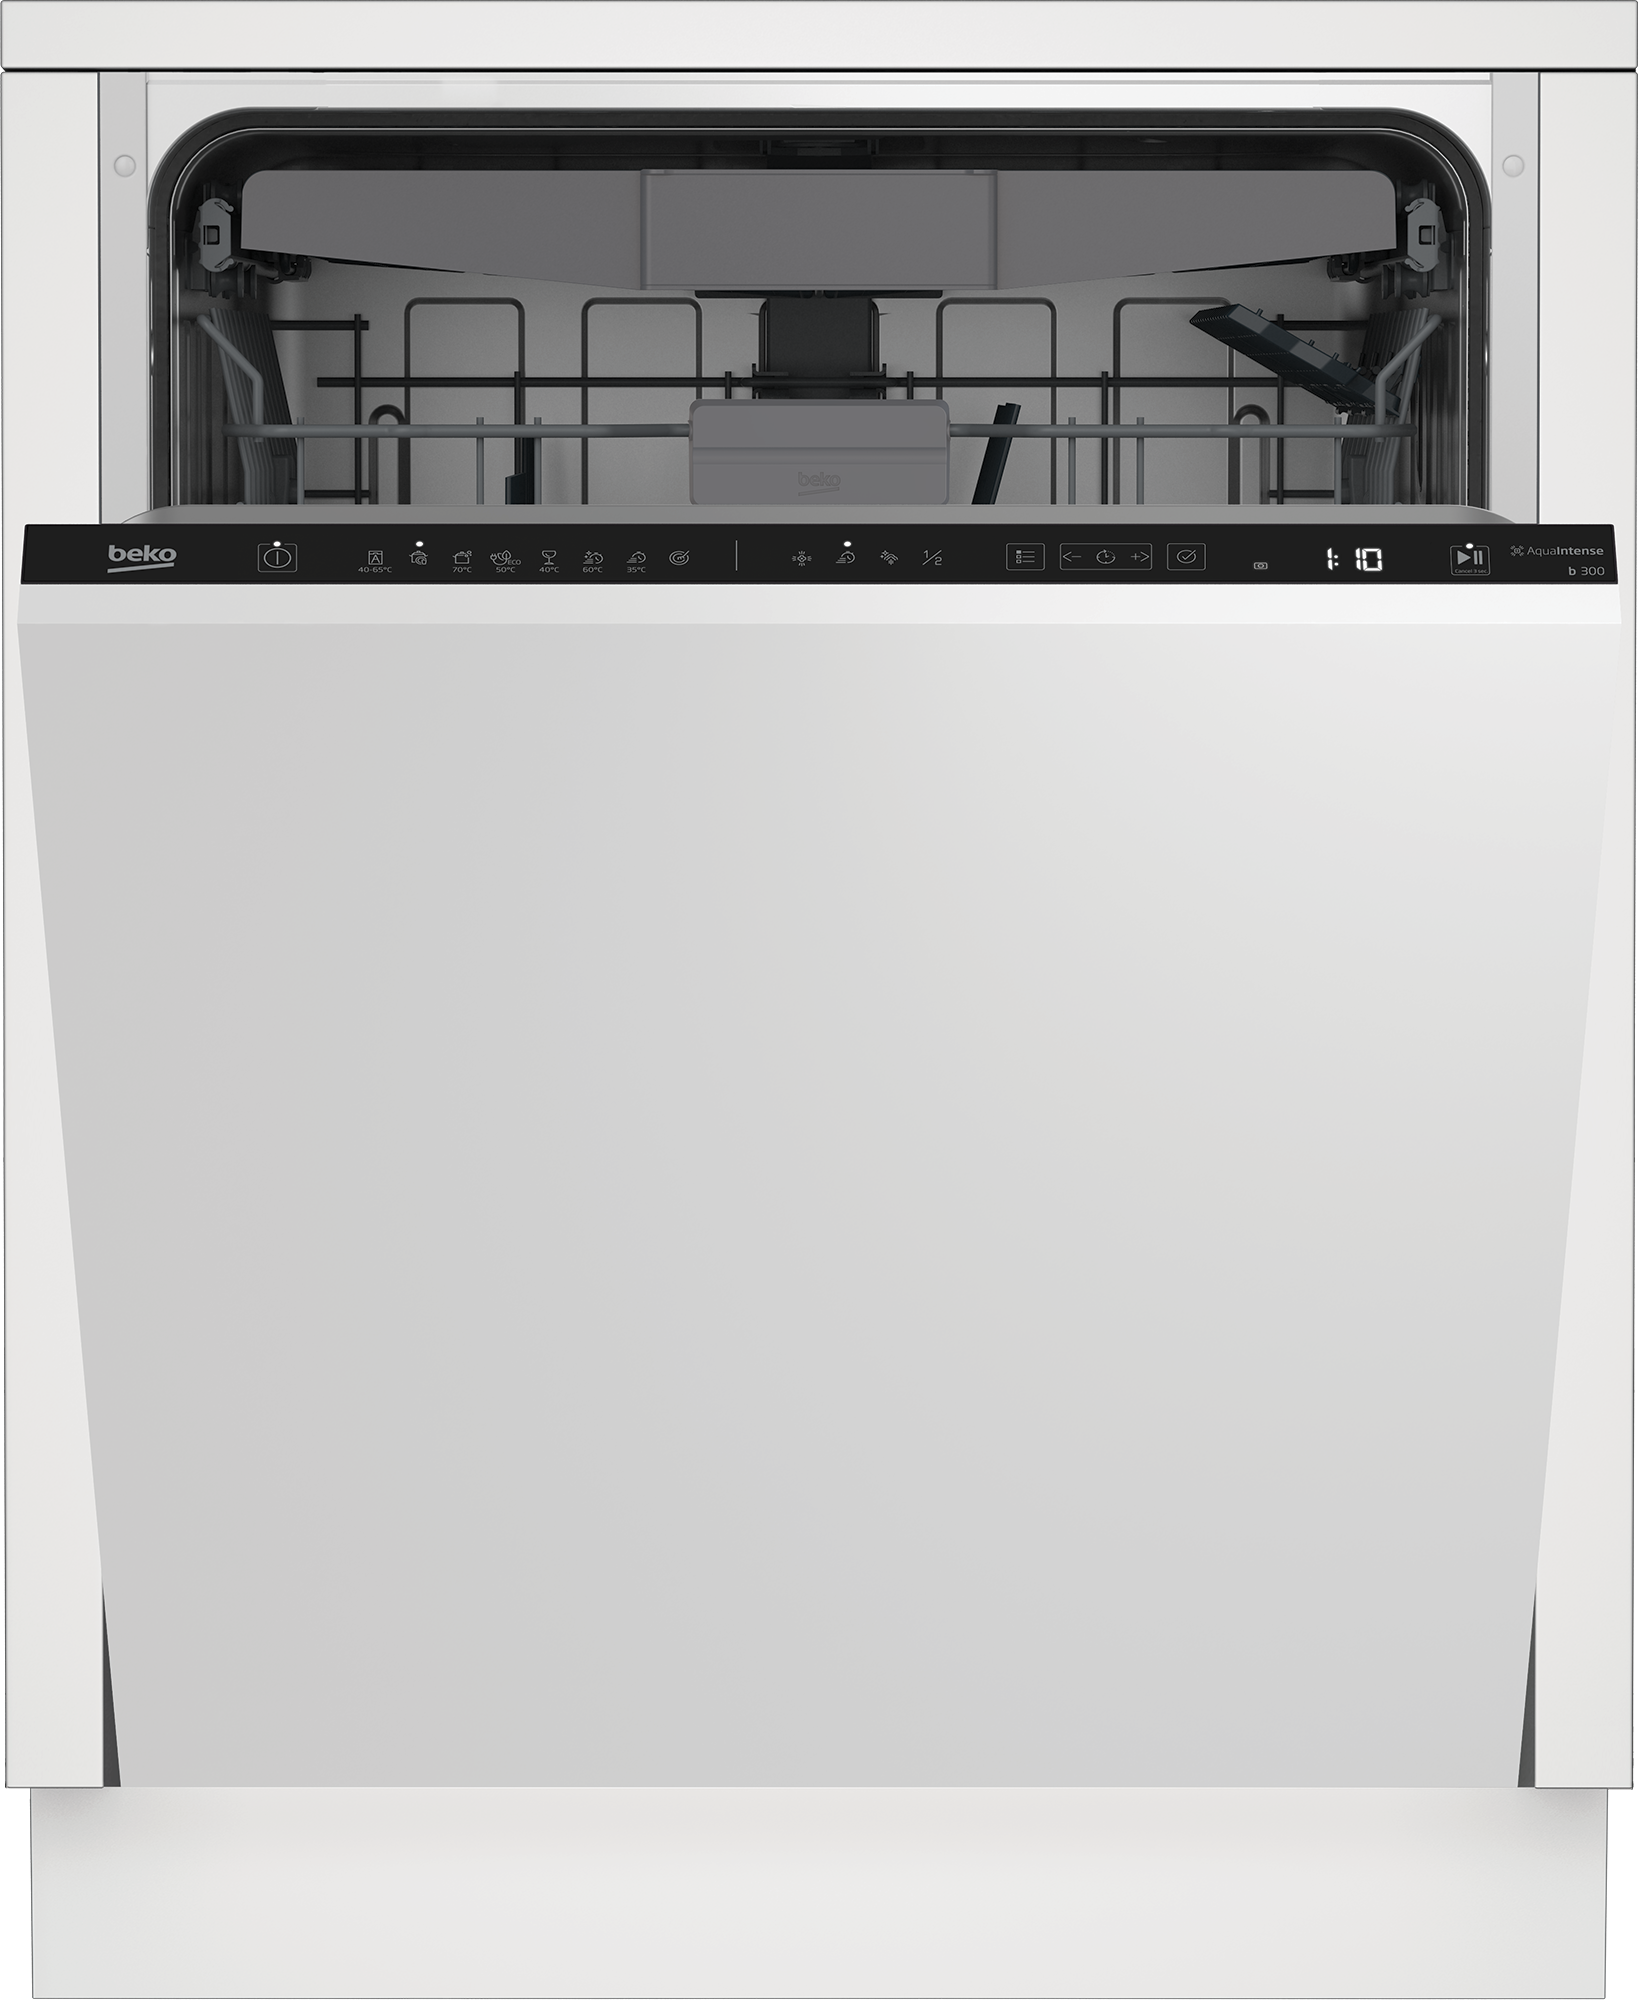 Beko 15 Place Integrated Dishwasher White DIN48Q21